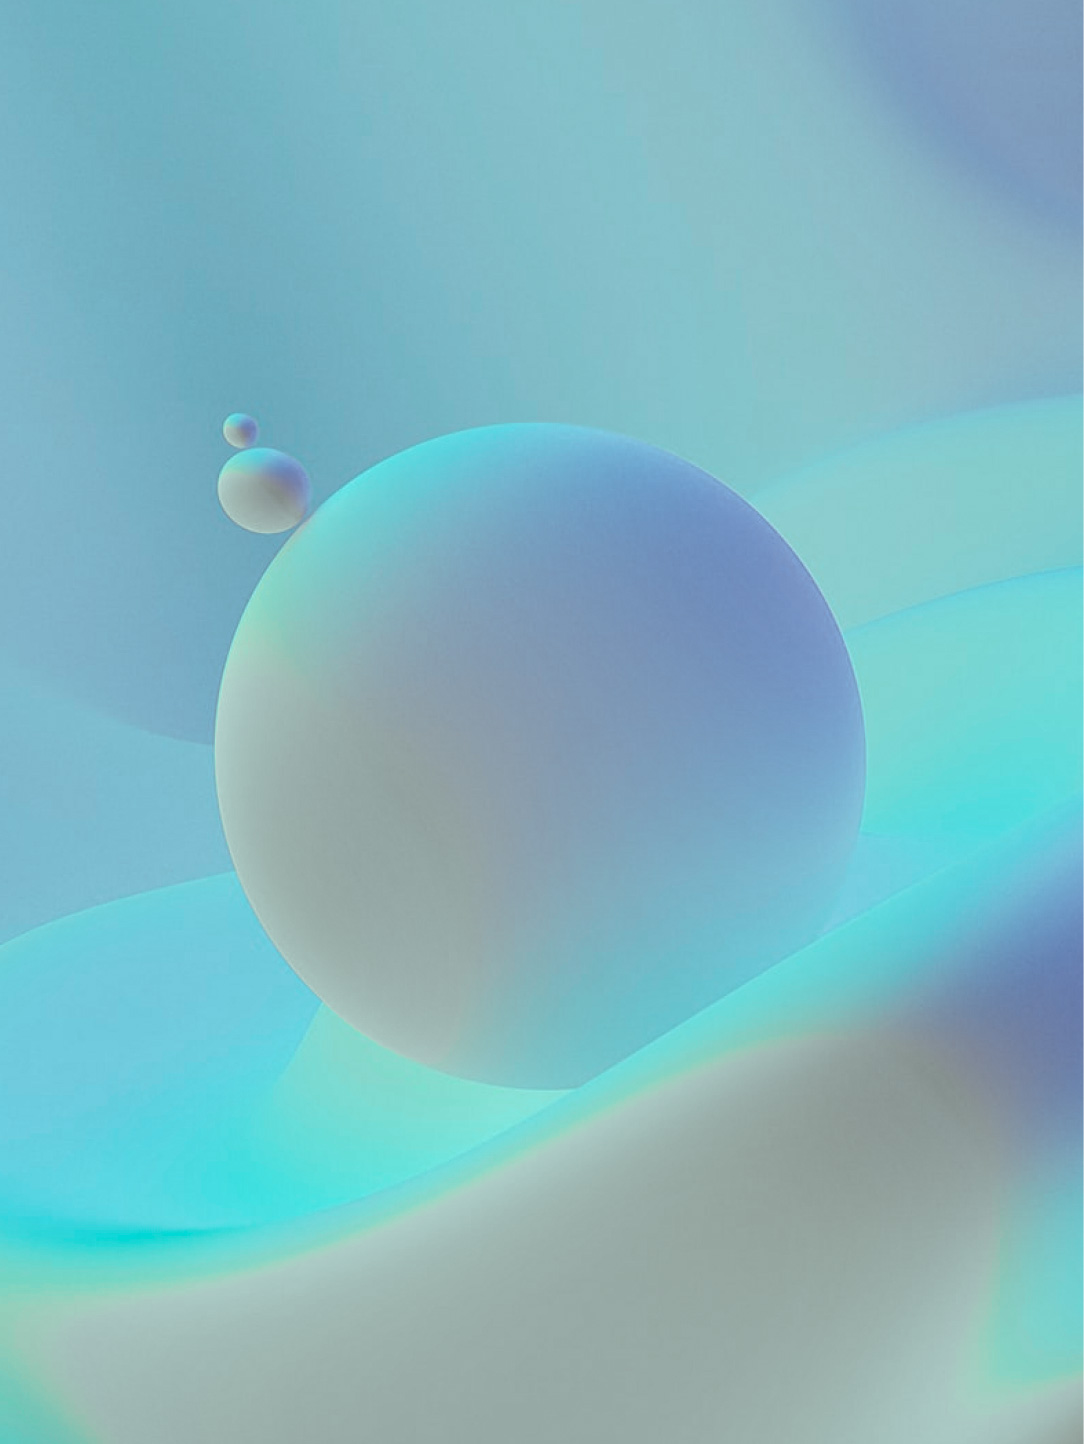 abstract sphere